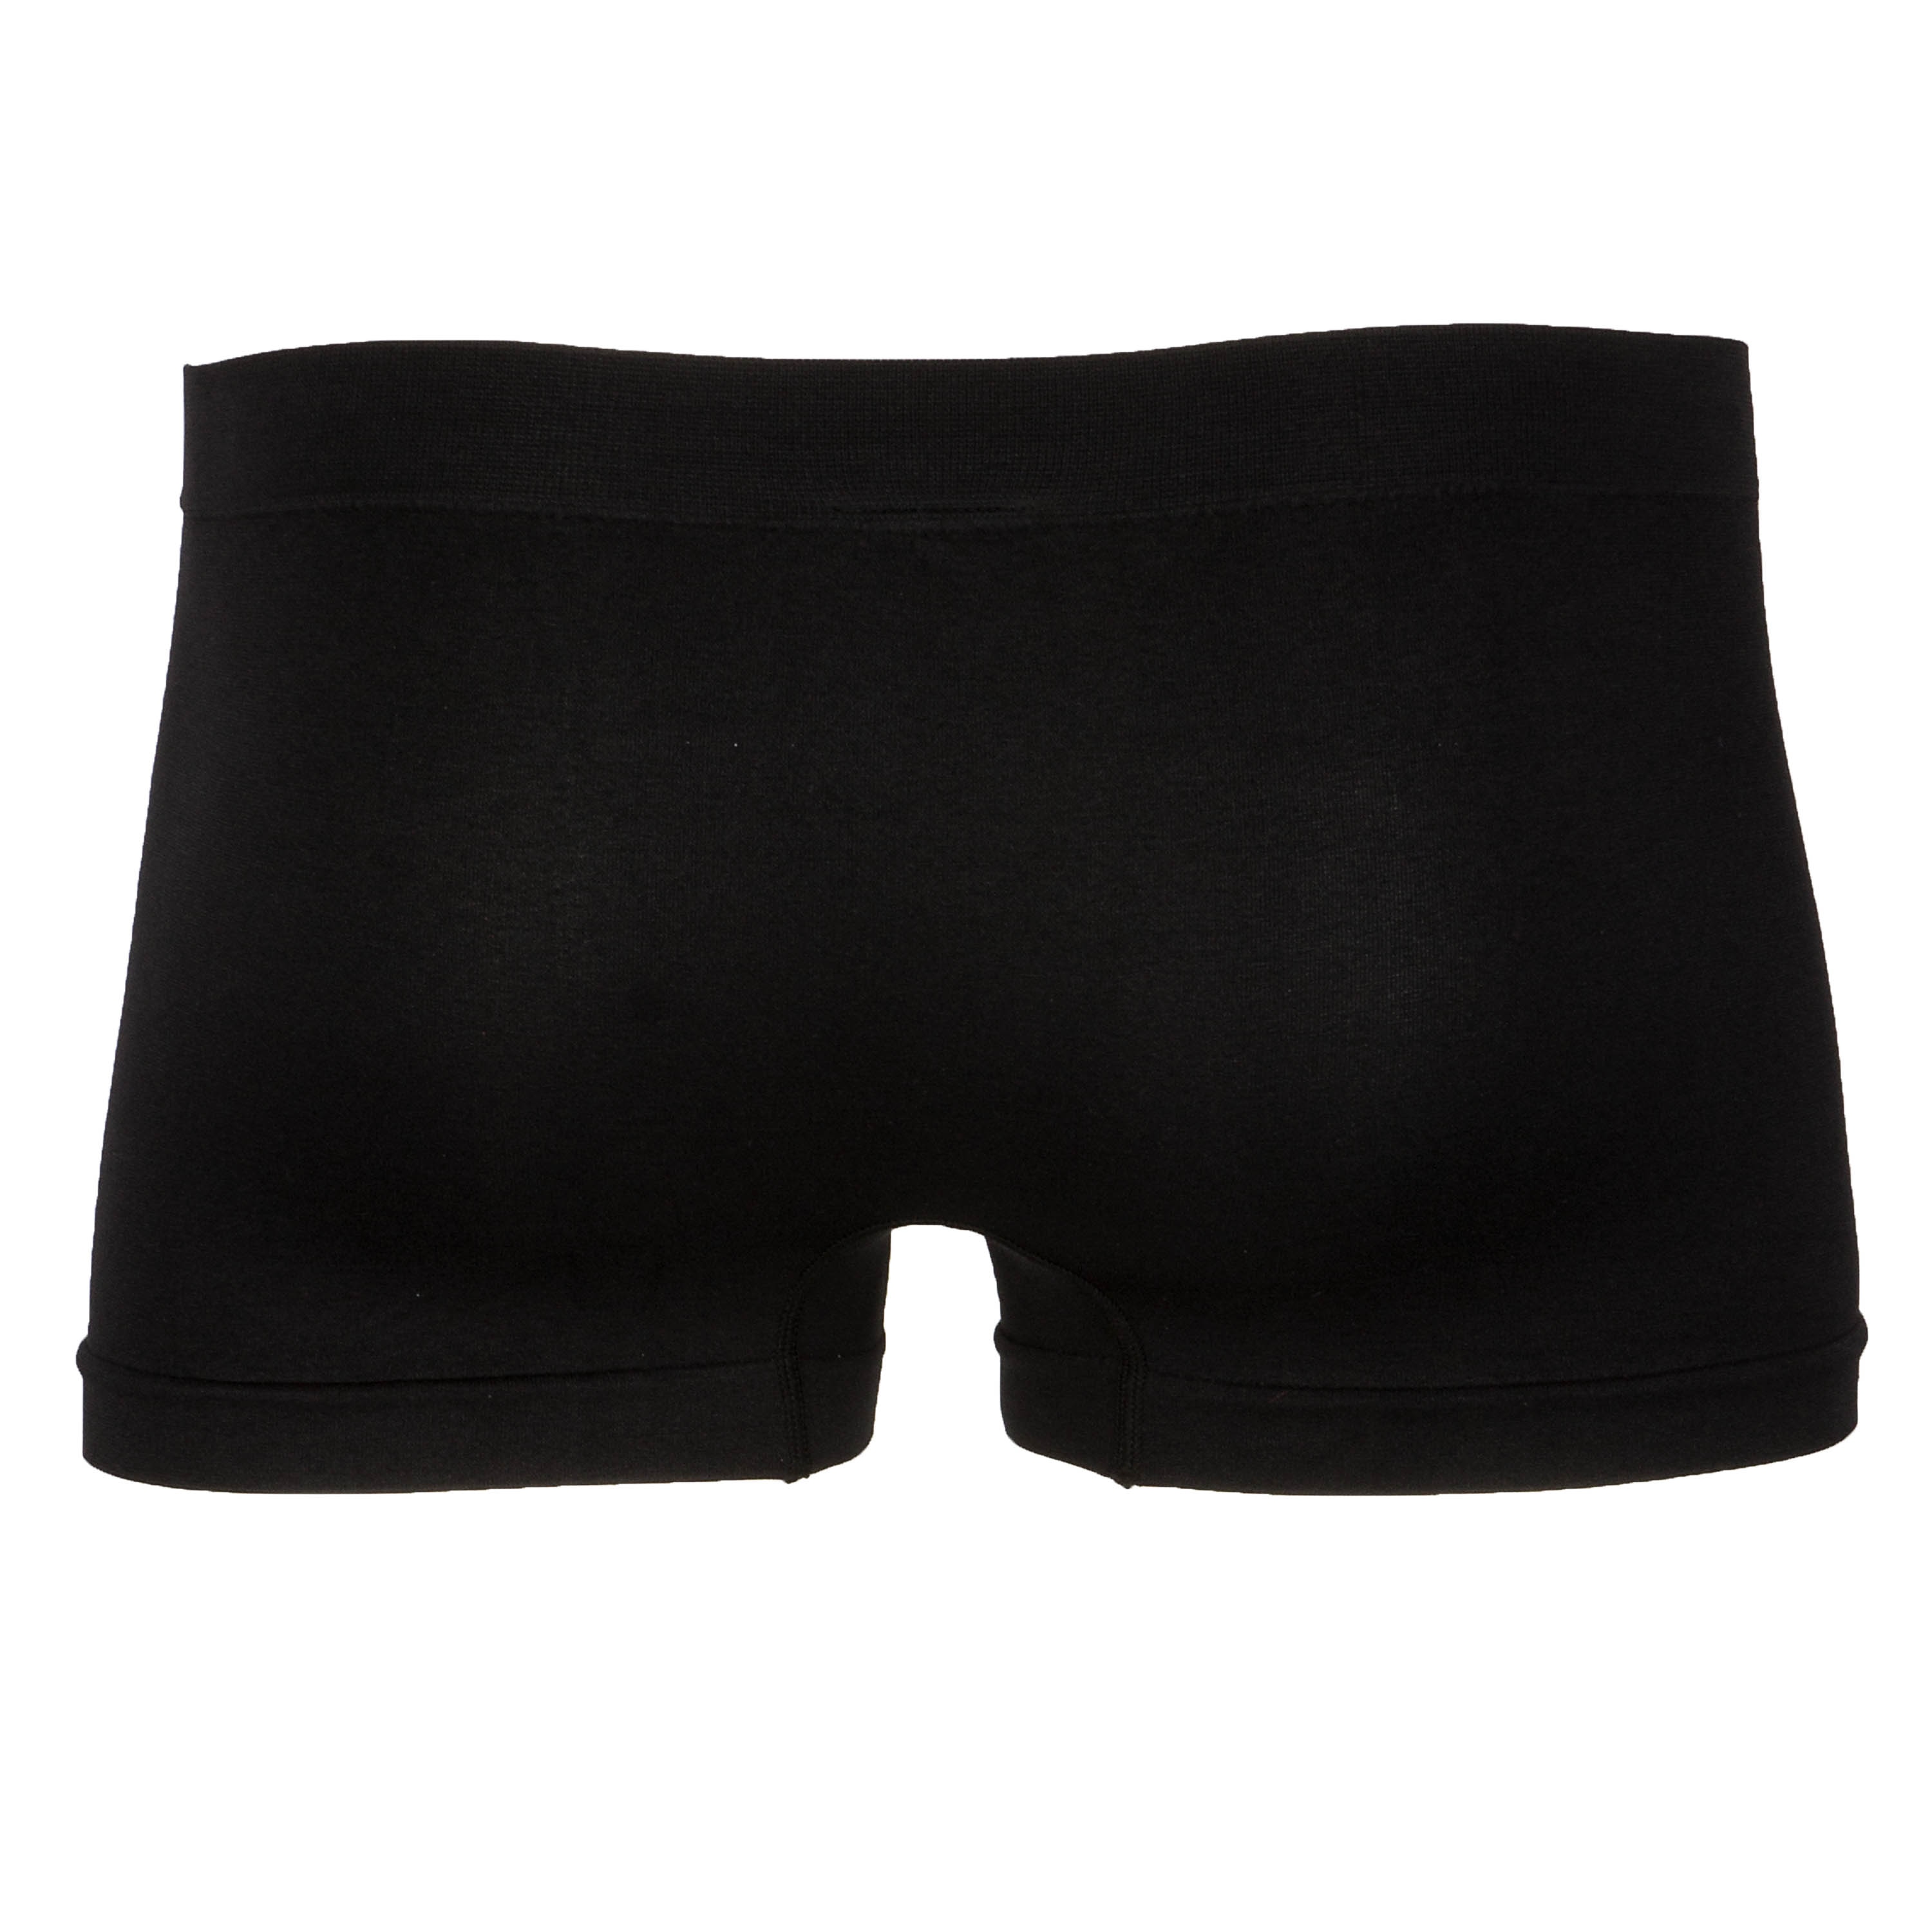 Purchase the Mil-Tec Boxer Shorts Sports black by ASMC